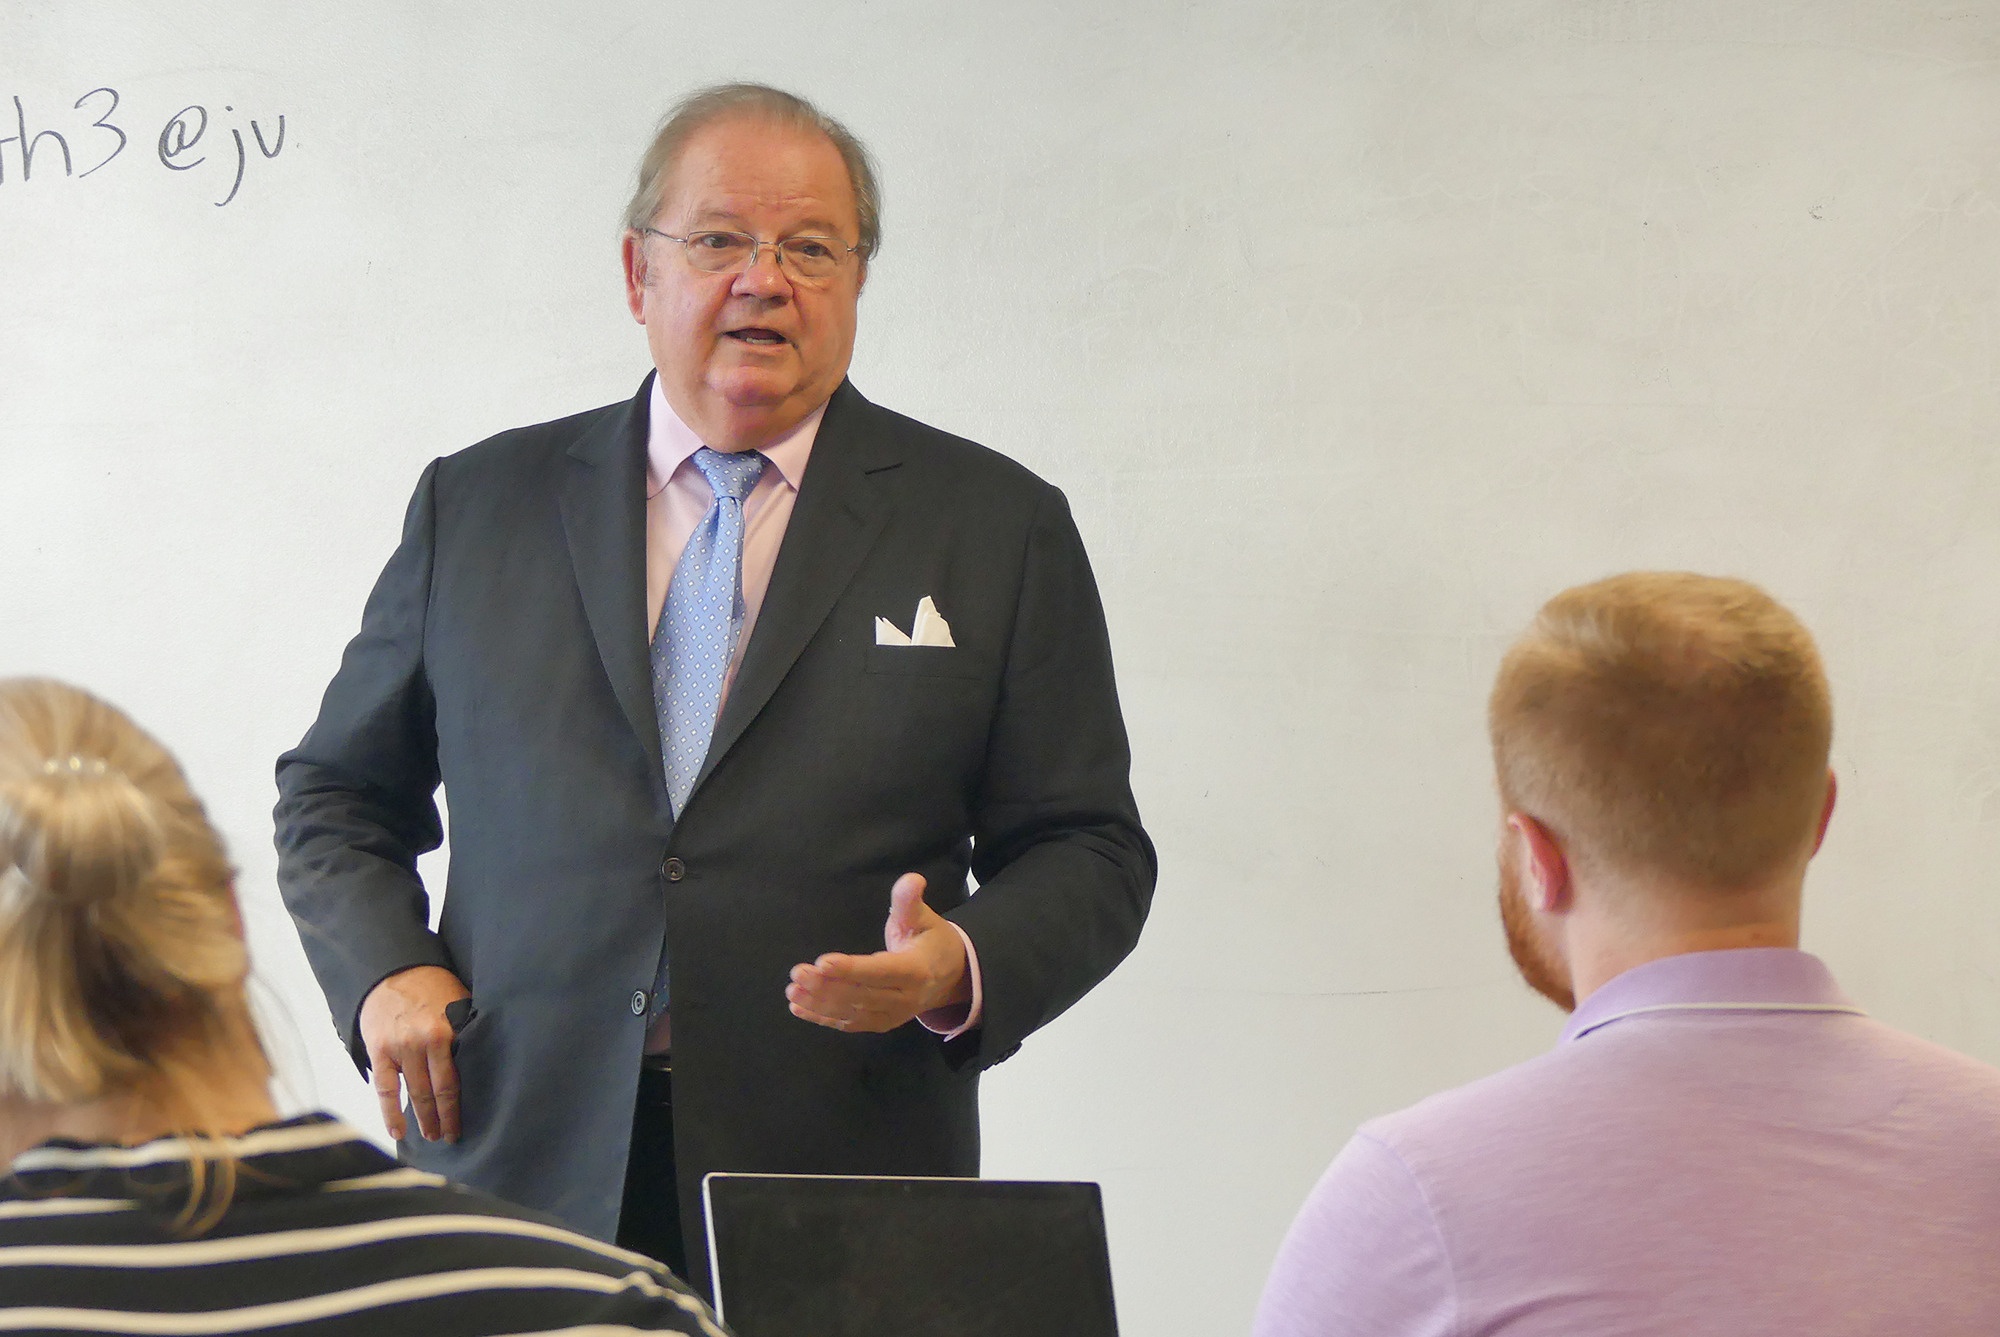 Jacksonville University College of Law Dean Nicholas Allard speaks to students on the first day of classes Aug. 8 at JU’s Downtown campus on the 18th floor in VyStar Tower at 76 S. Laura St.